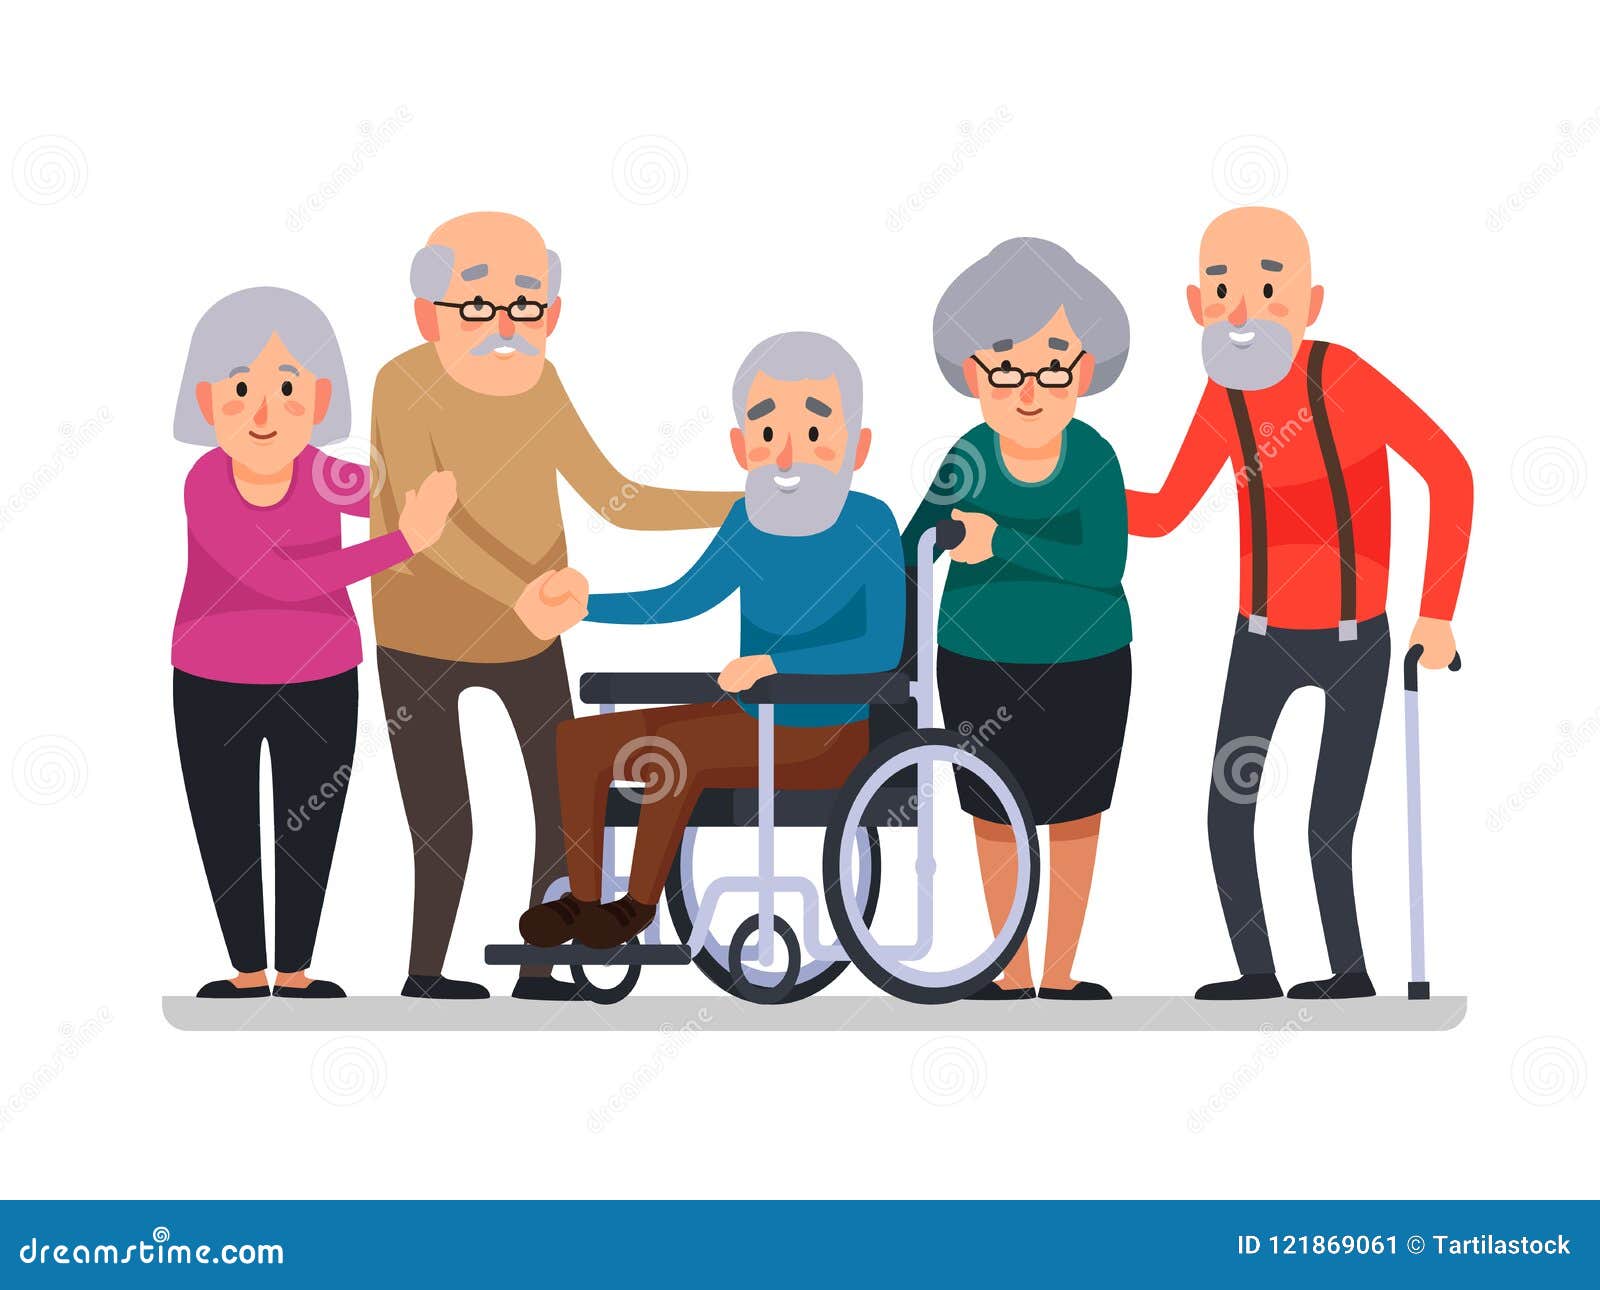 cartoon old people. happy aged citizens, disabled senior on wheelchair and elderly citizen with a cane cartoon 